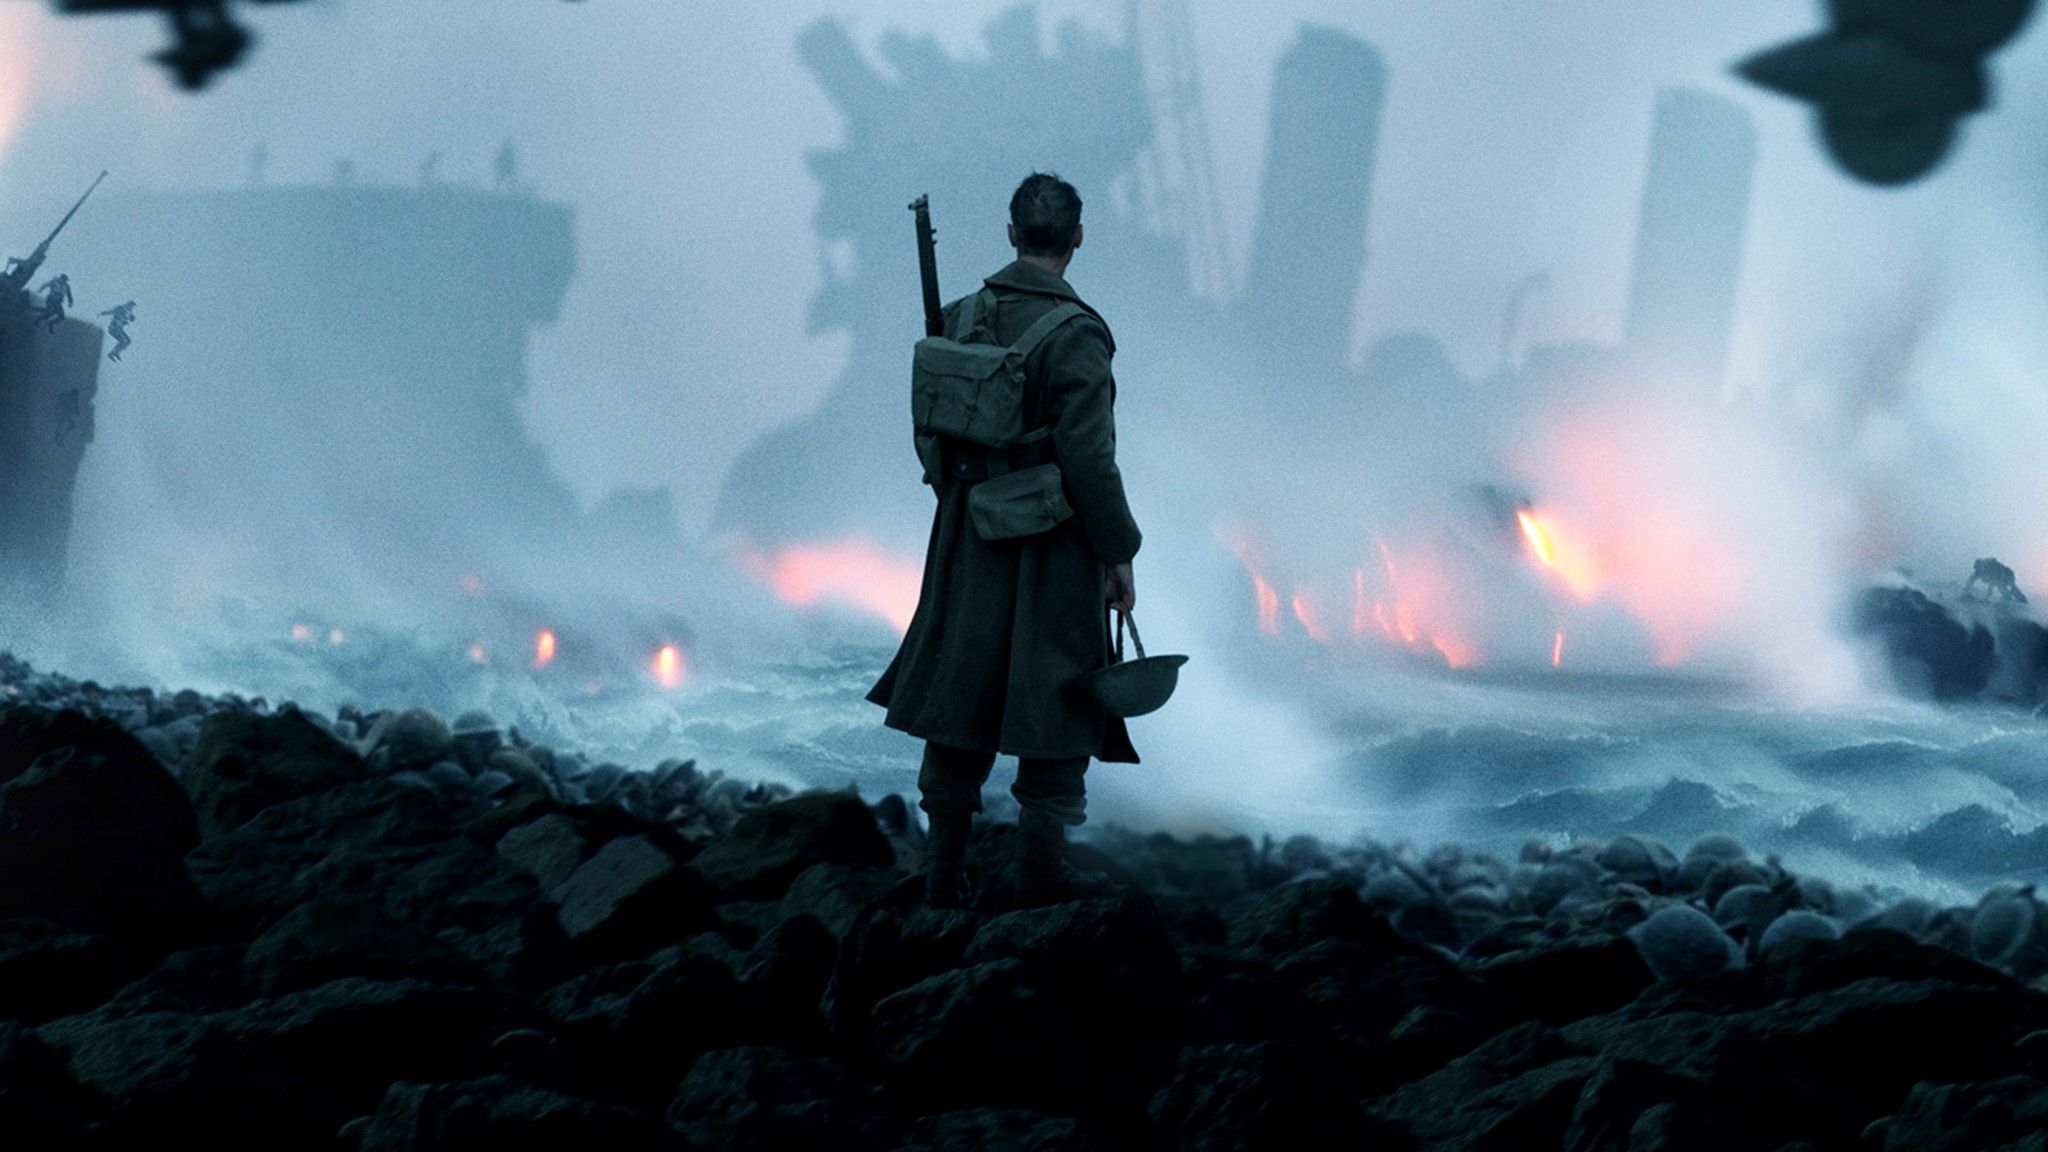 Dunkirk. World War II films of this century are. by Αchilleus